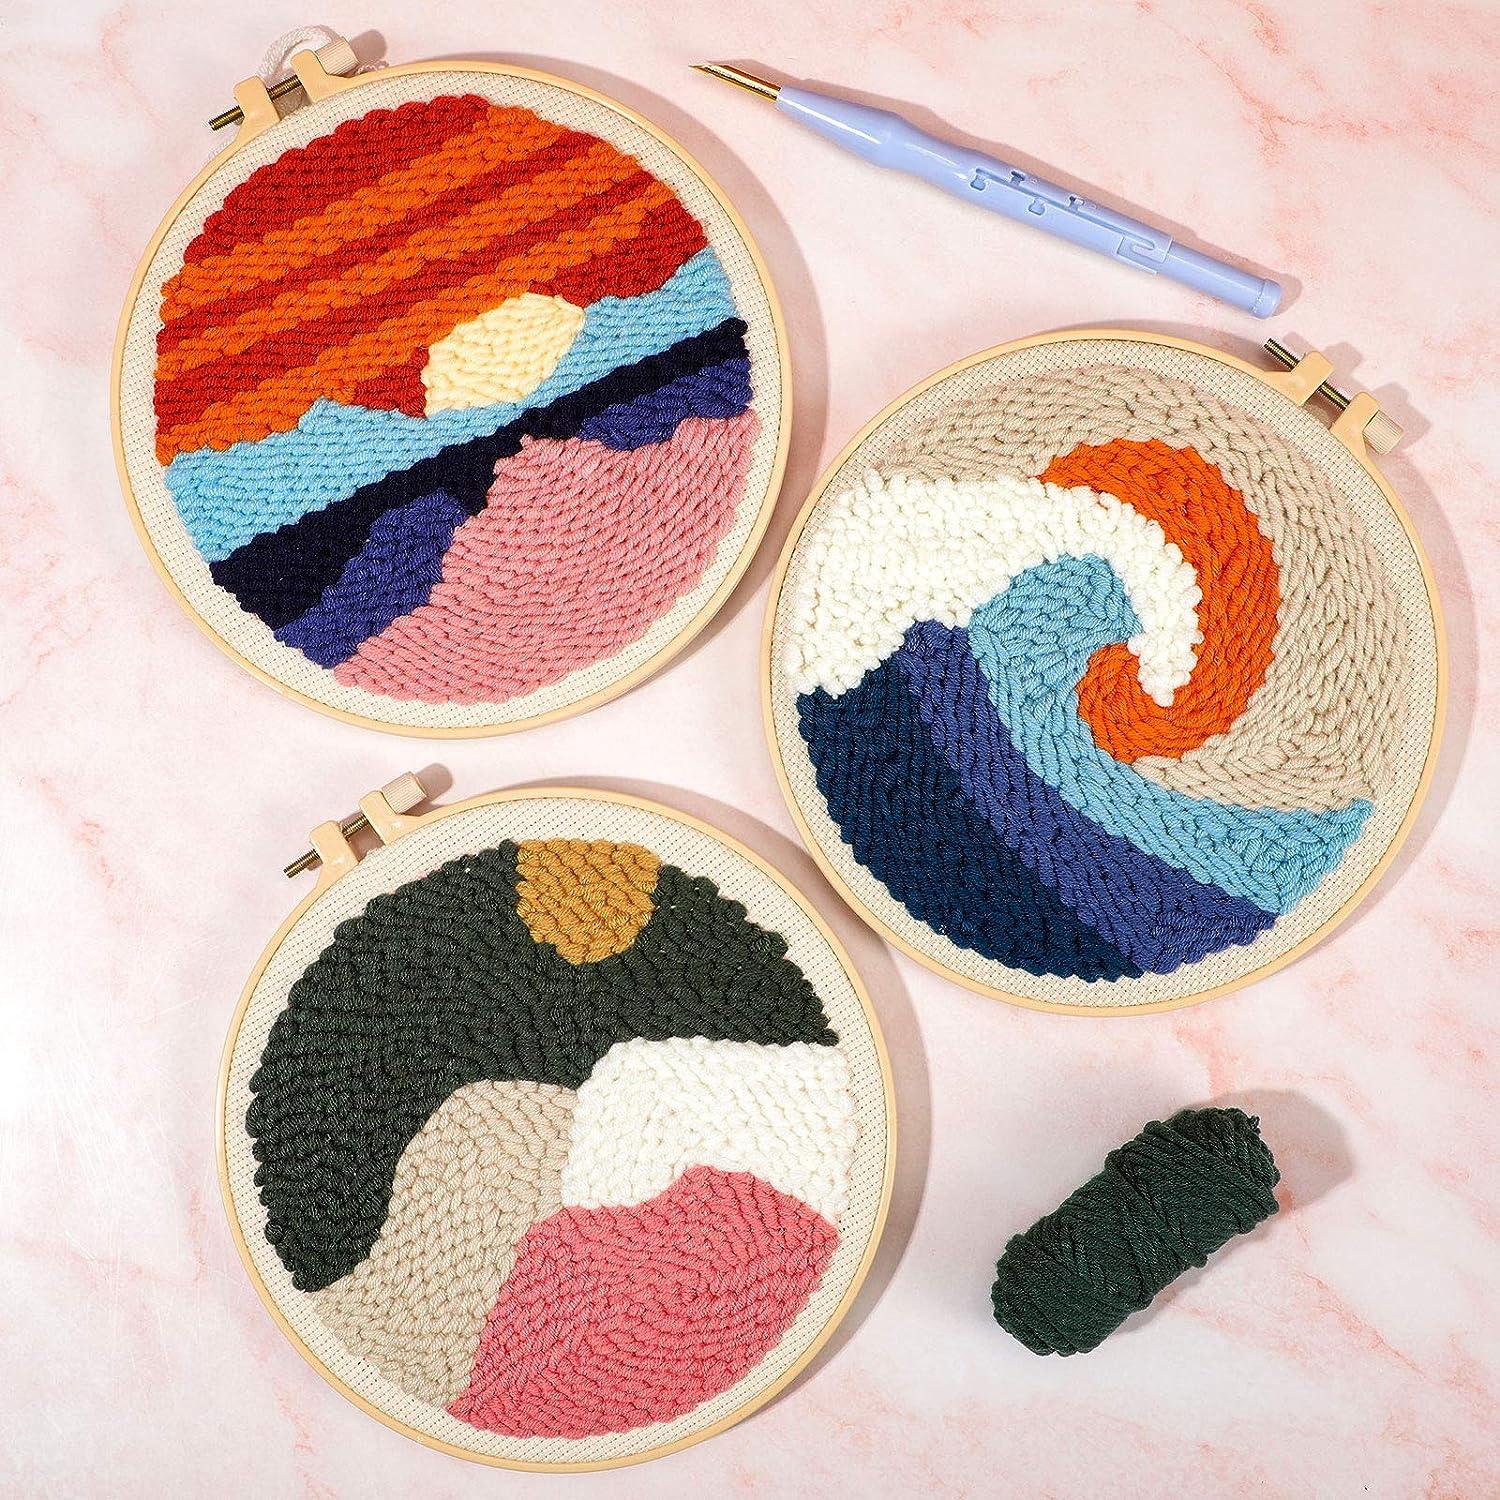 Series Of Scenery Punch Needle Embroidery Starter Kits Punch Needle Tool  Threader Fabric Embroidery Hoop Yarn Rug Punch Needlesunrise